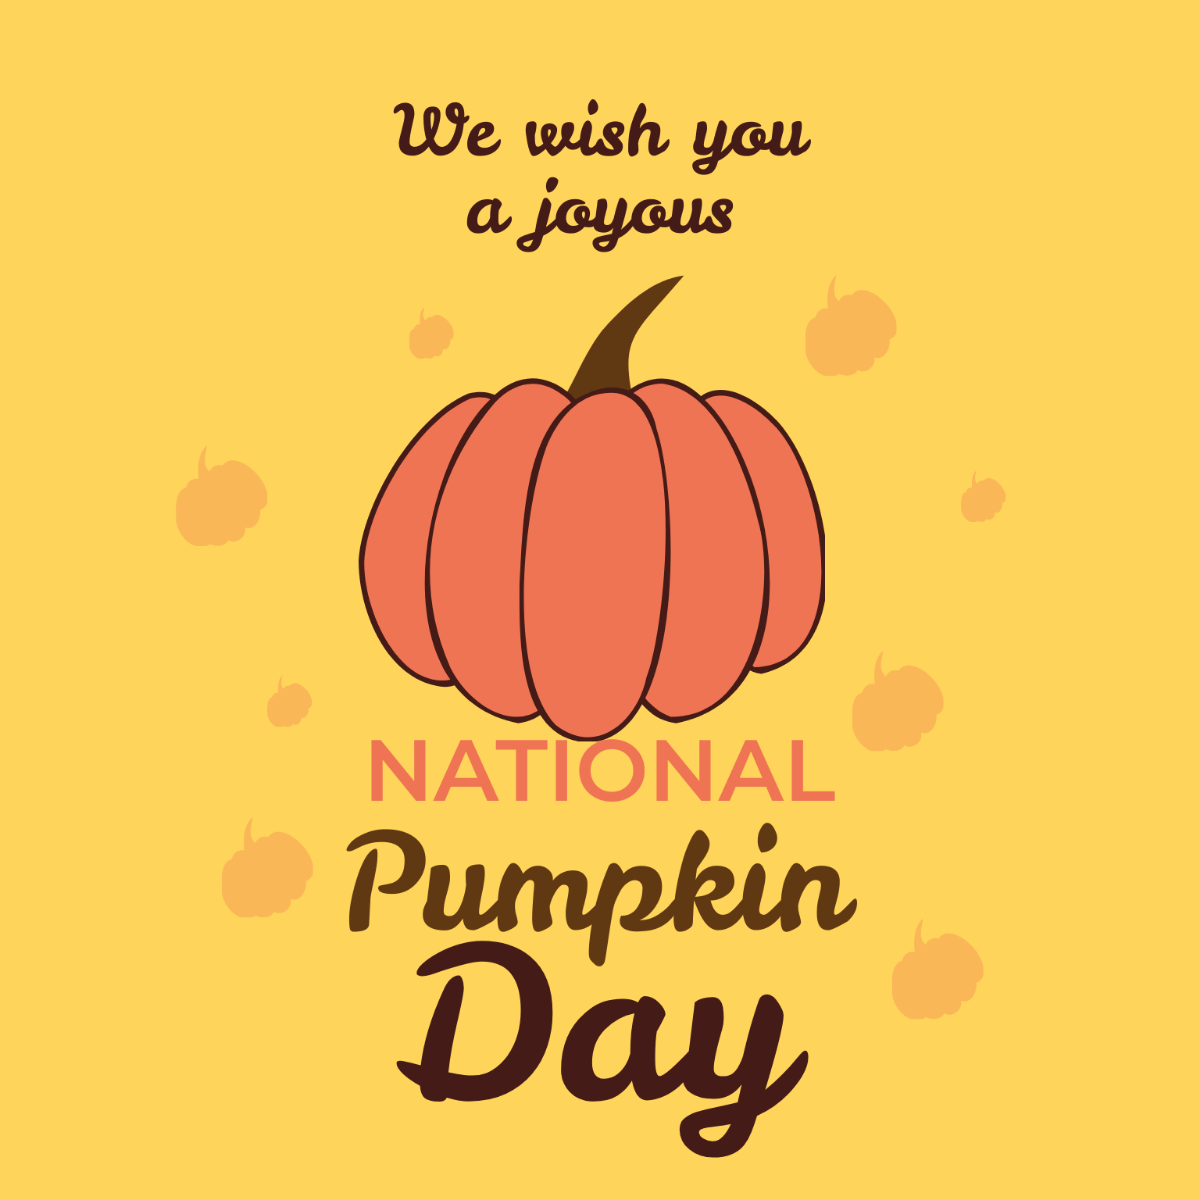 National Pumpkin Day Wishes Vector